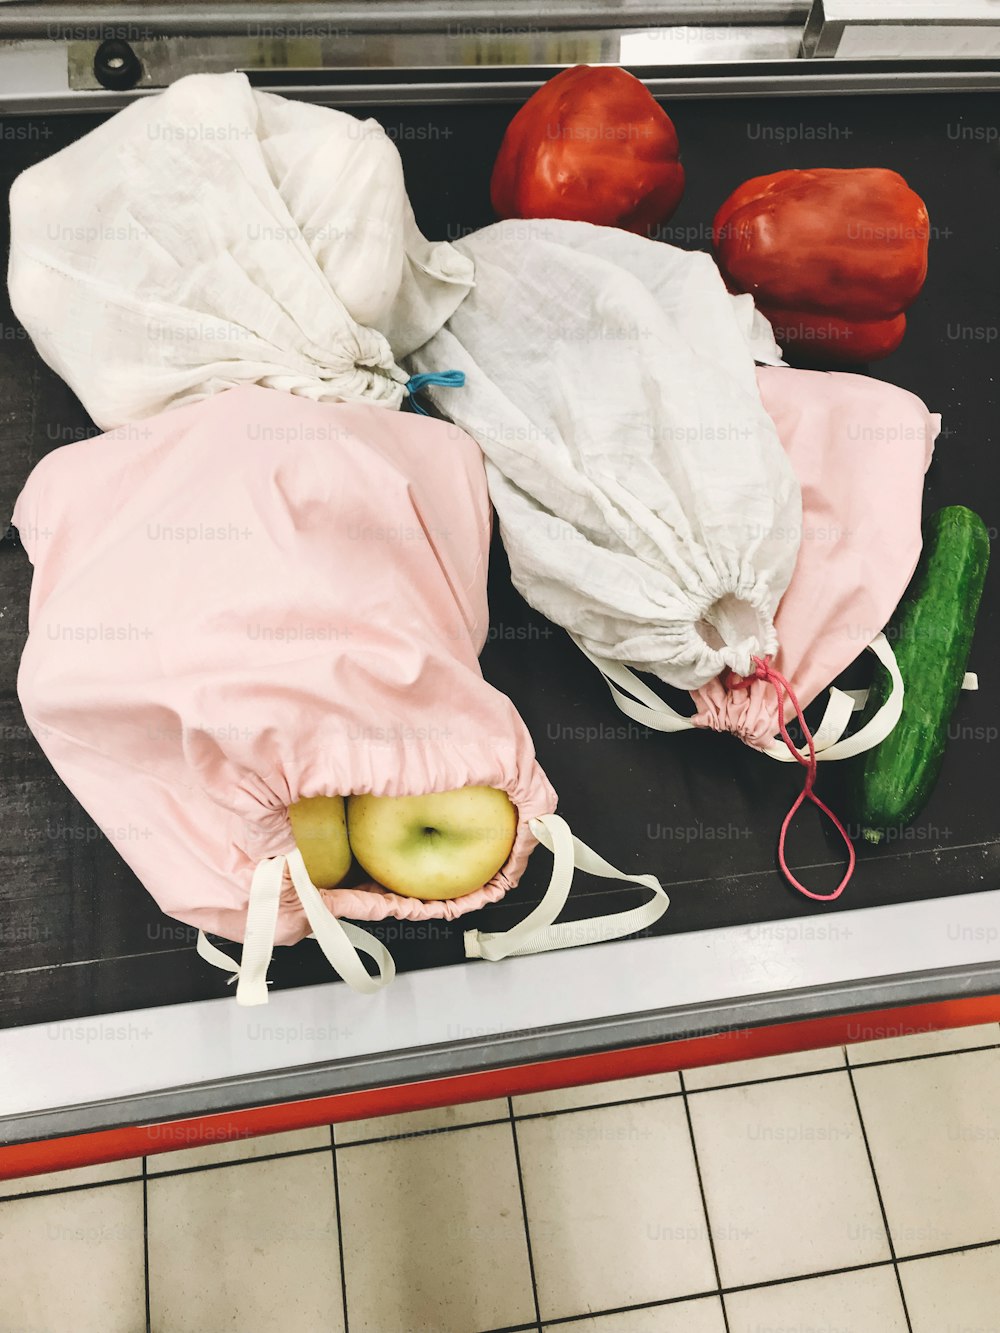 Eco reusable bags with vegetables and fruits on checkout counter line in supermarket. Zero waste shopping concept. Ban single use plastic. Eco linen bags for food. Sustainable lifestyle